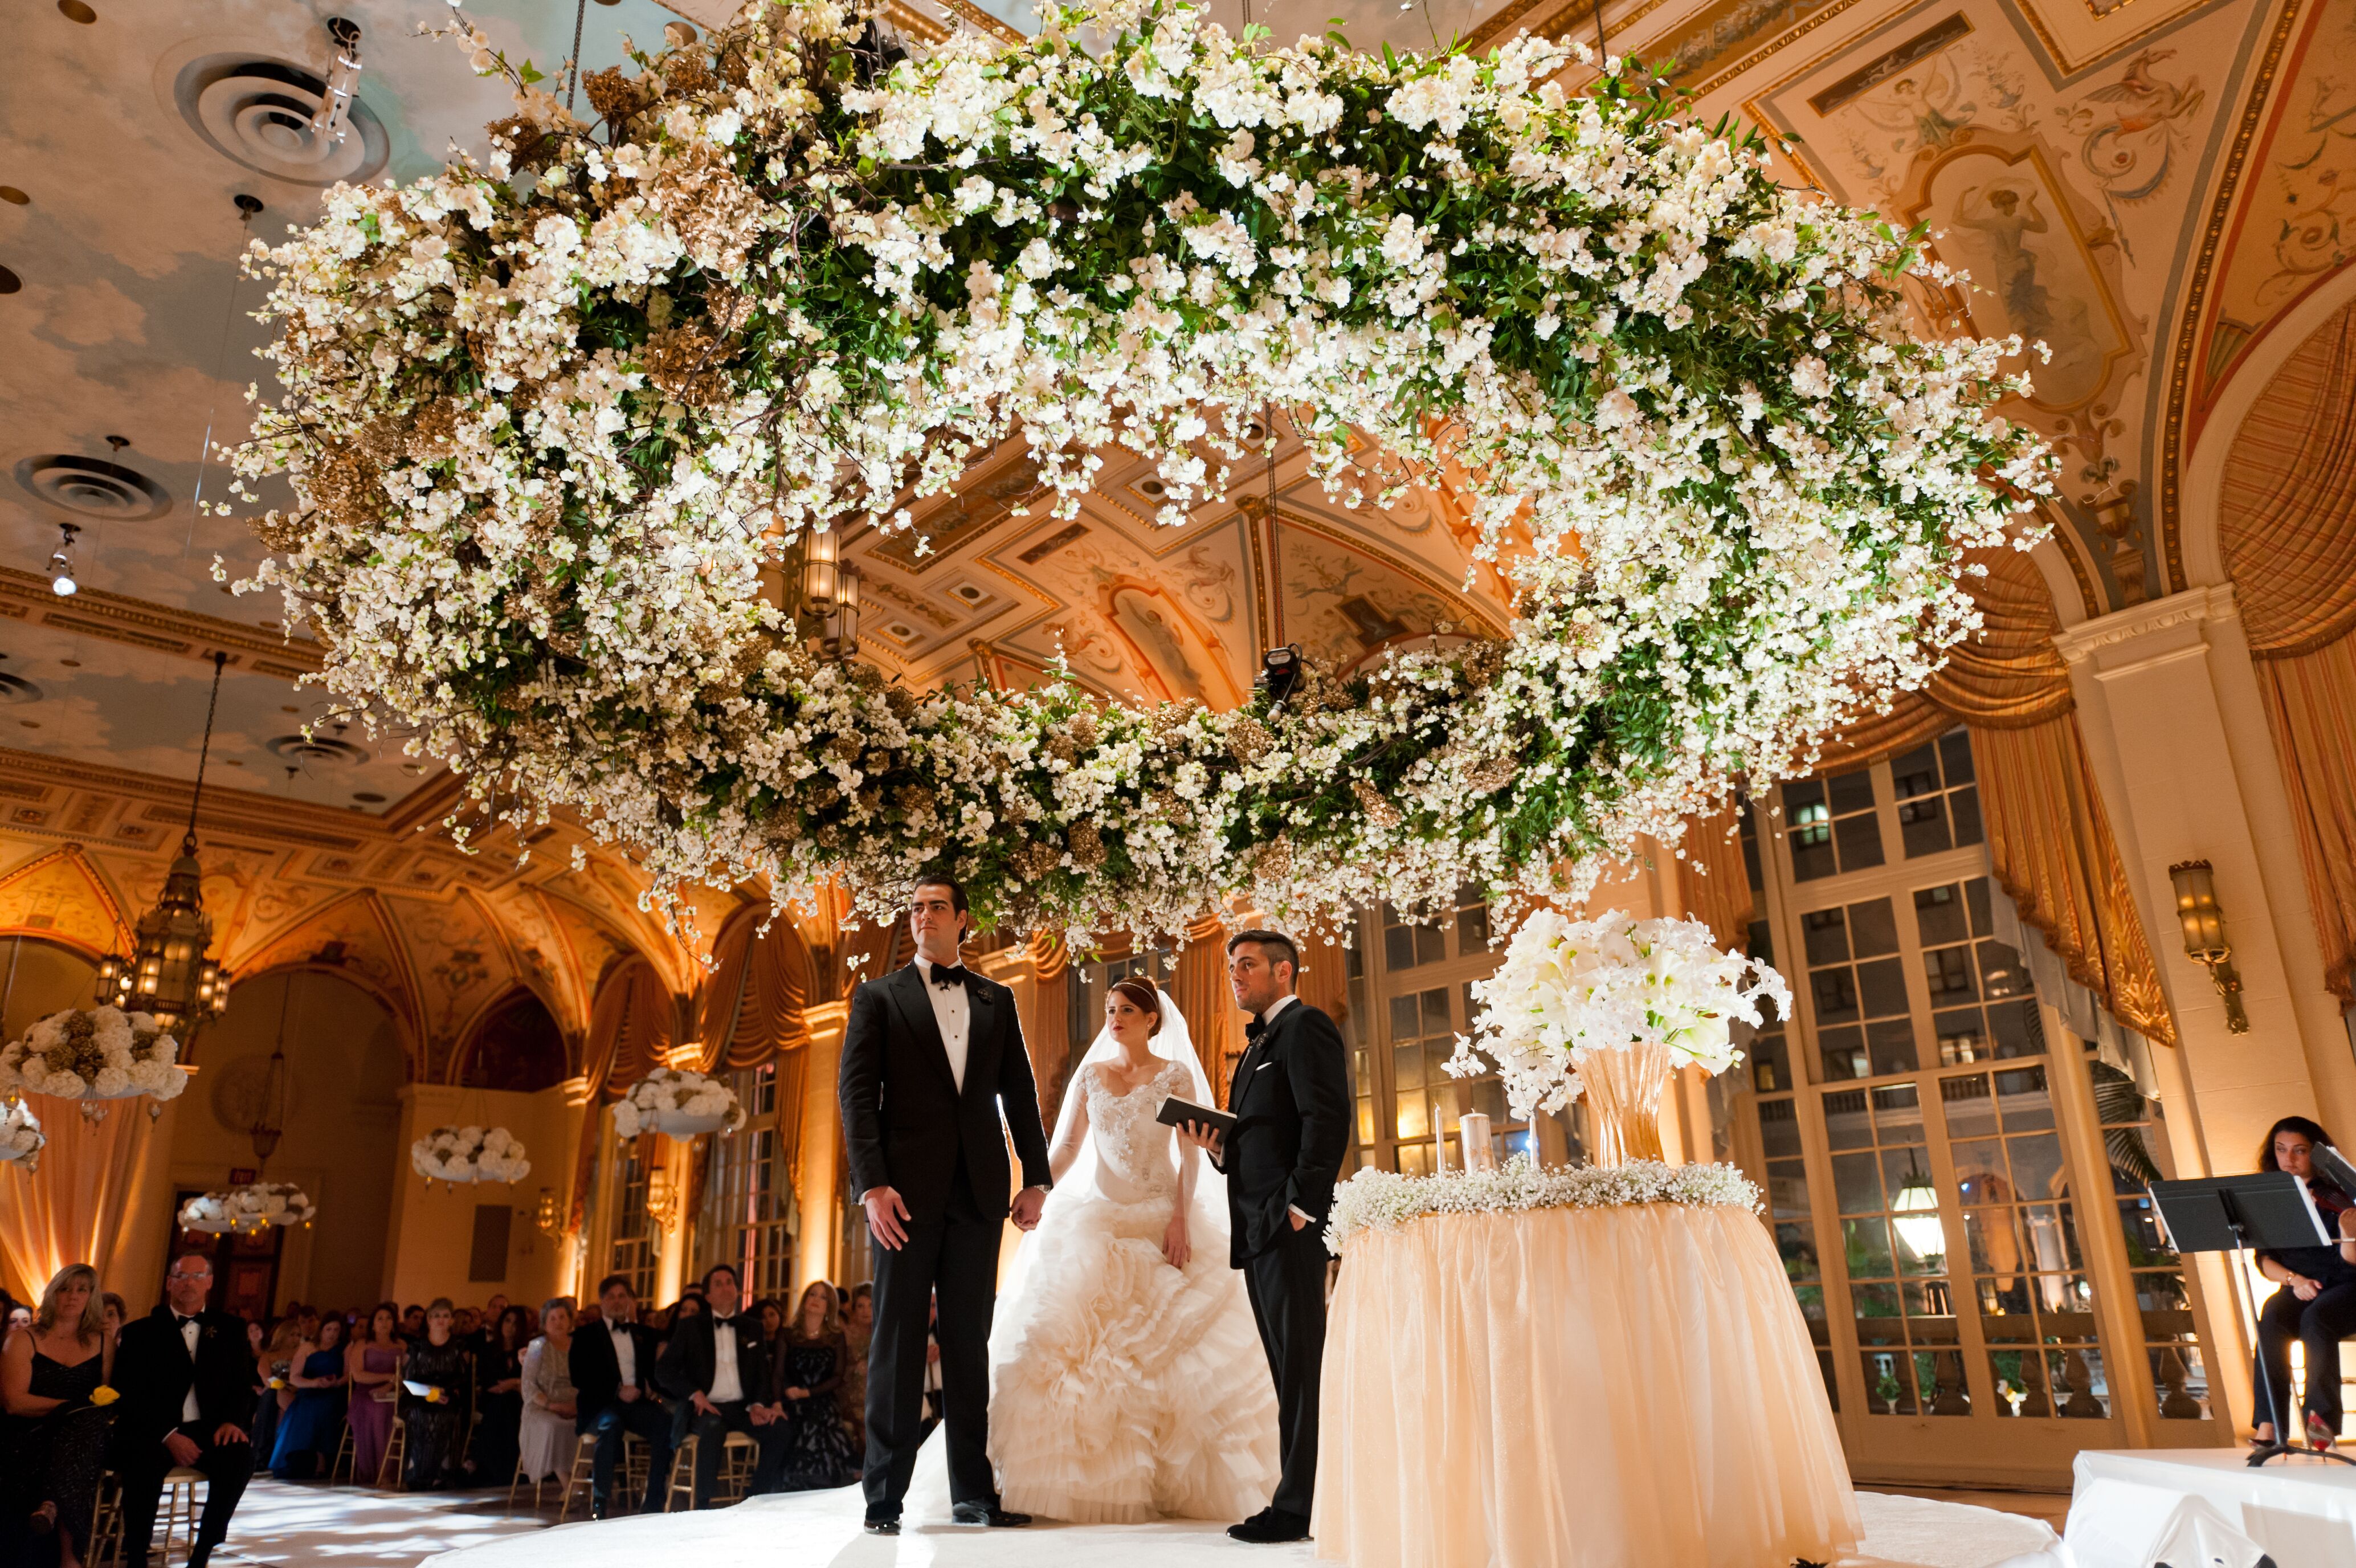 A Lavish Lotus Inspired Wedding At The Breakers In Palm Beach Florida